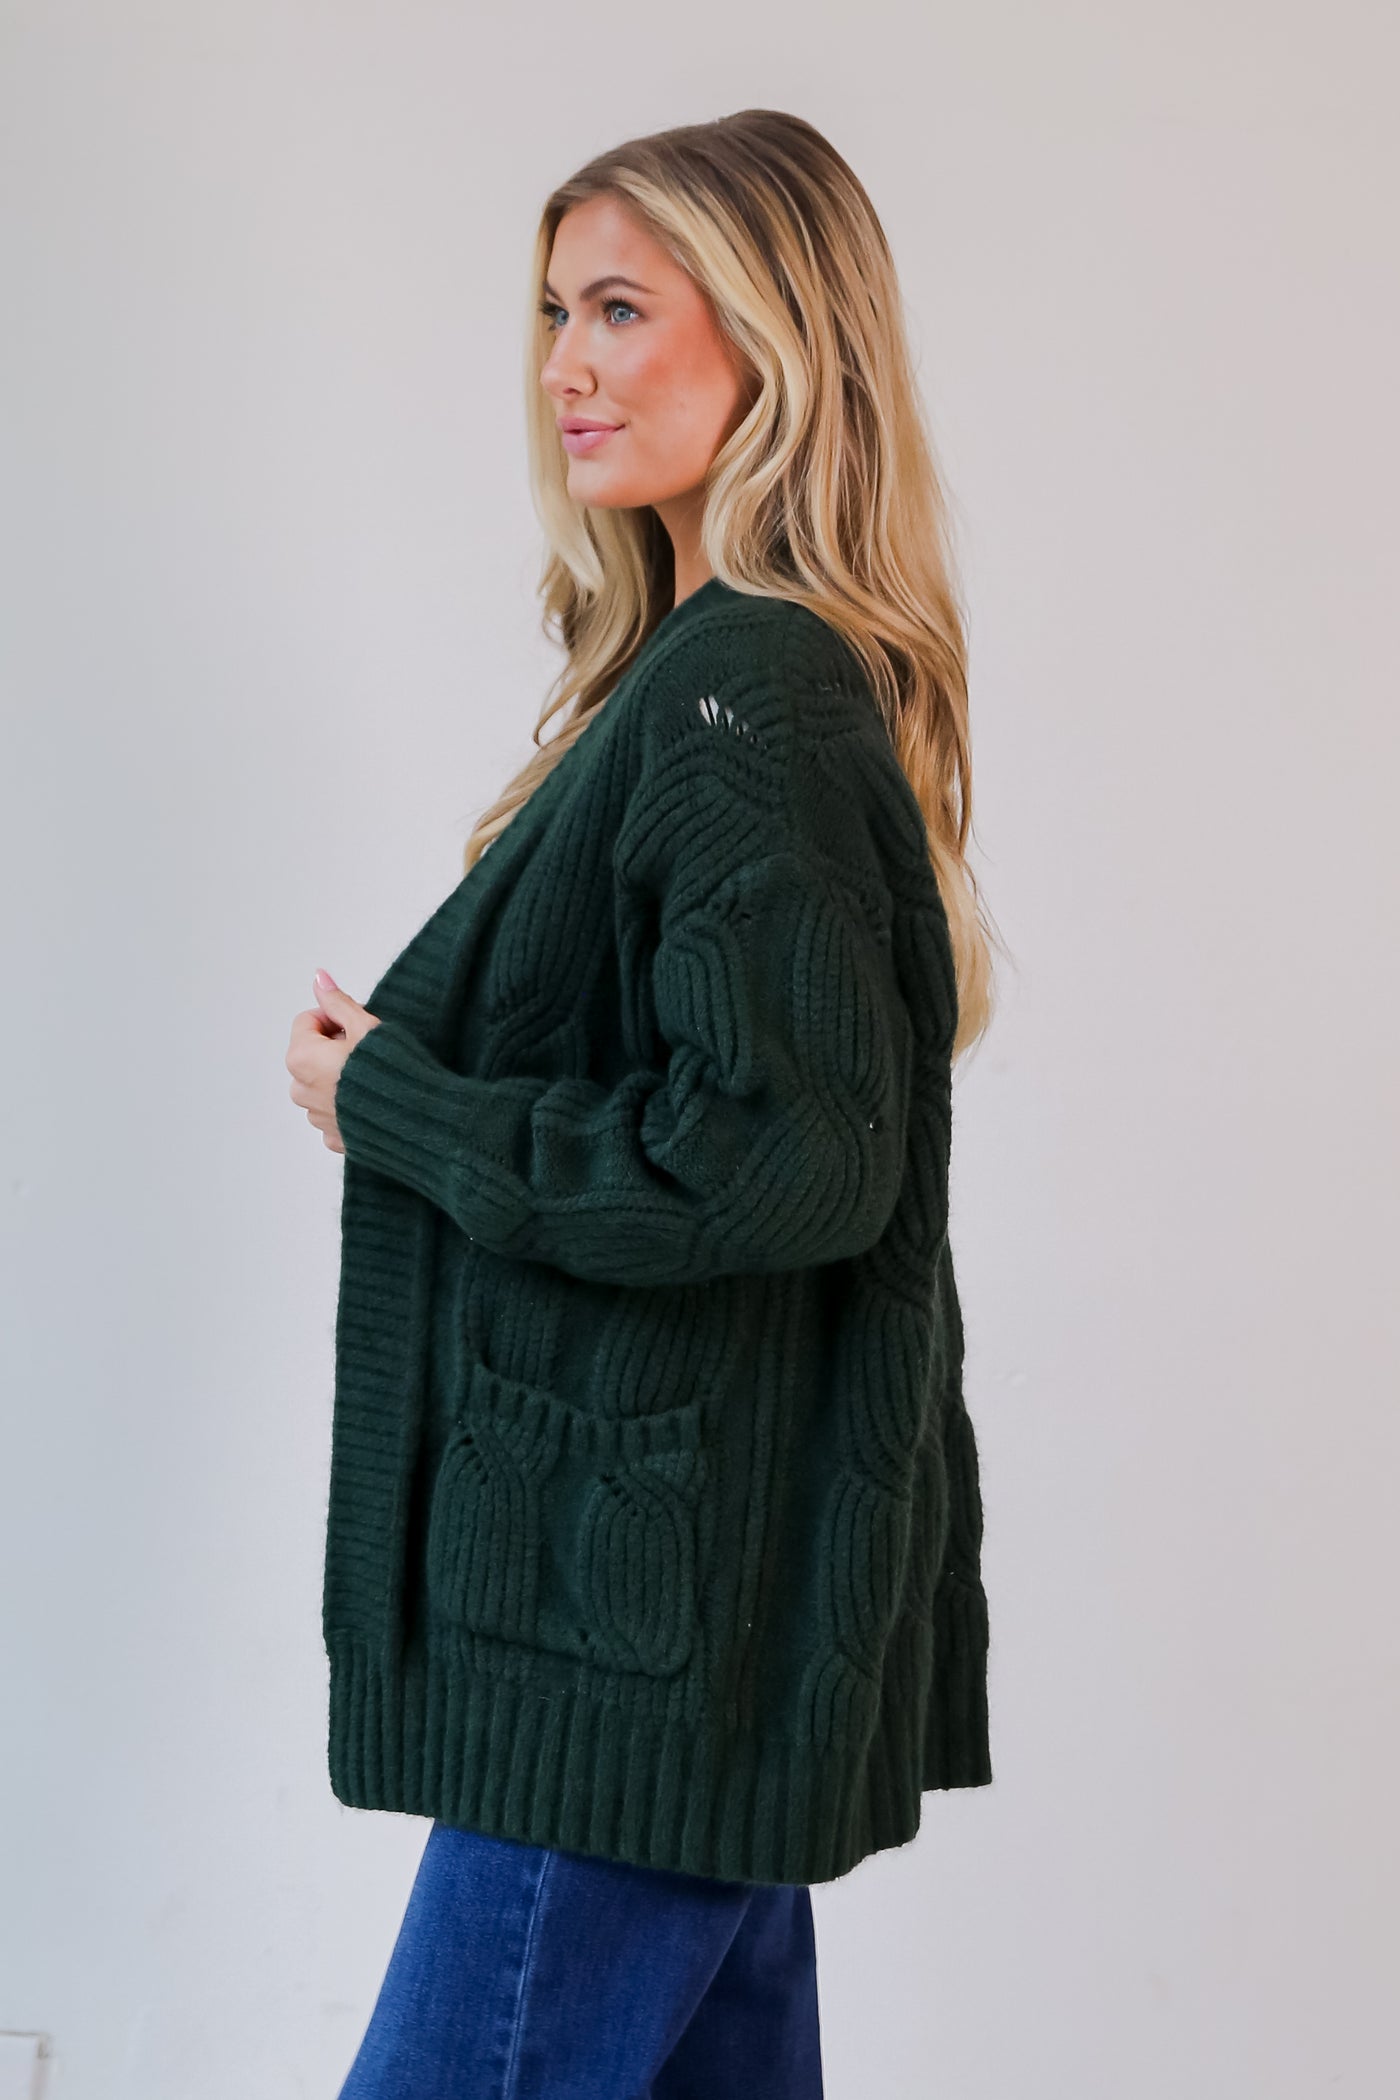 green Cardigan side view